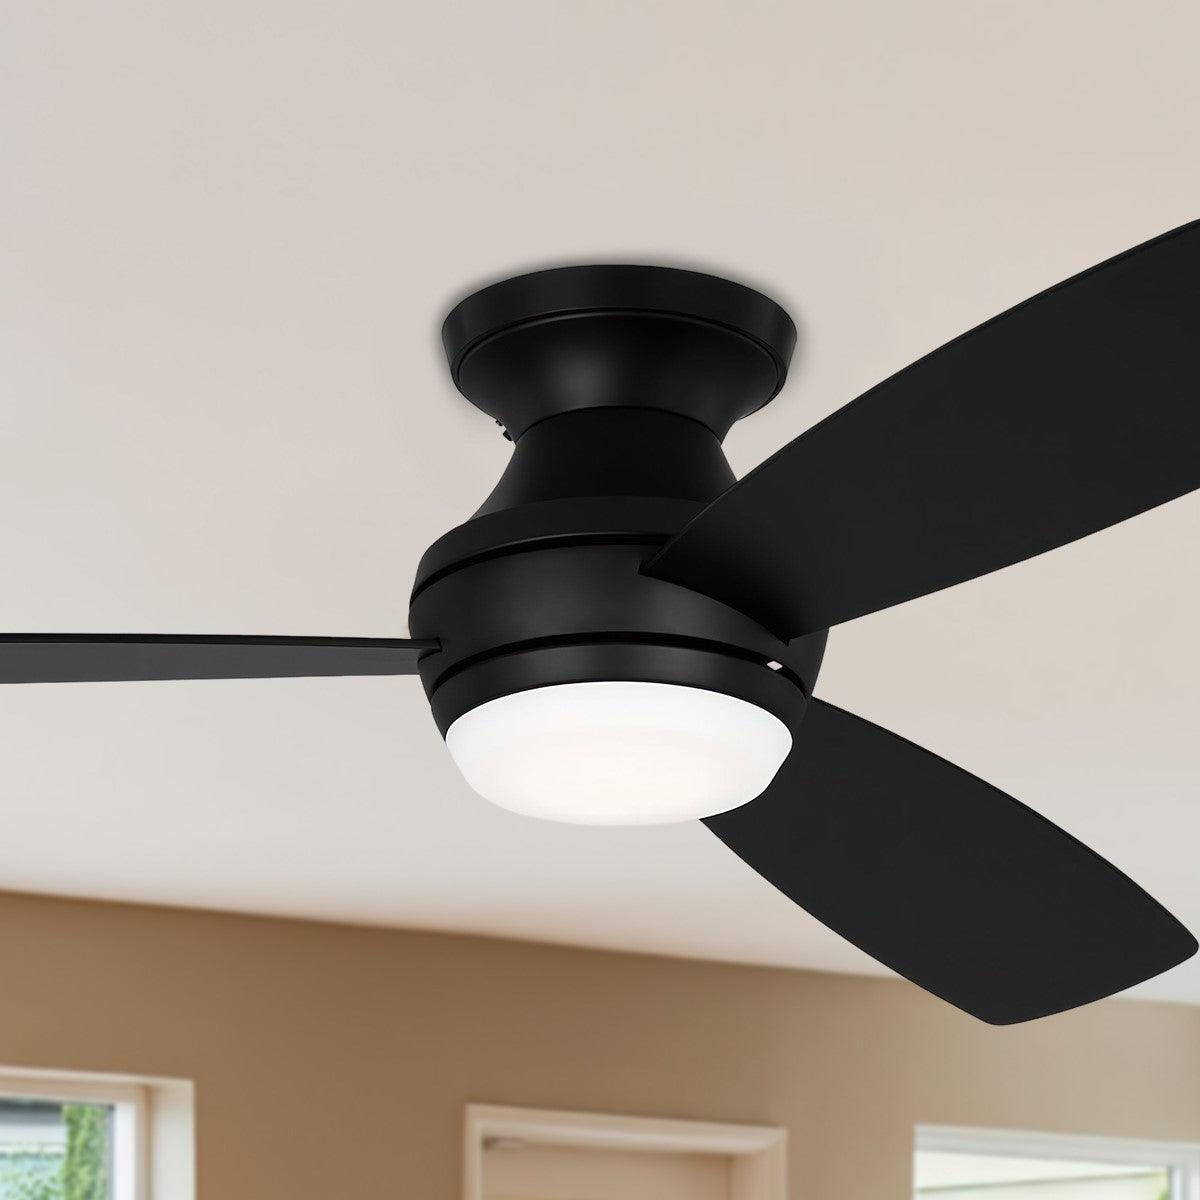 Ikon 52 In. Hugger Ceiling Fan With Light And Remote